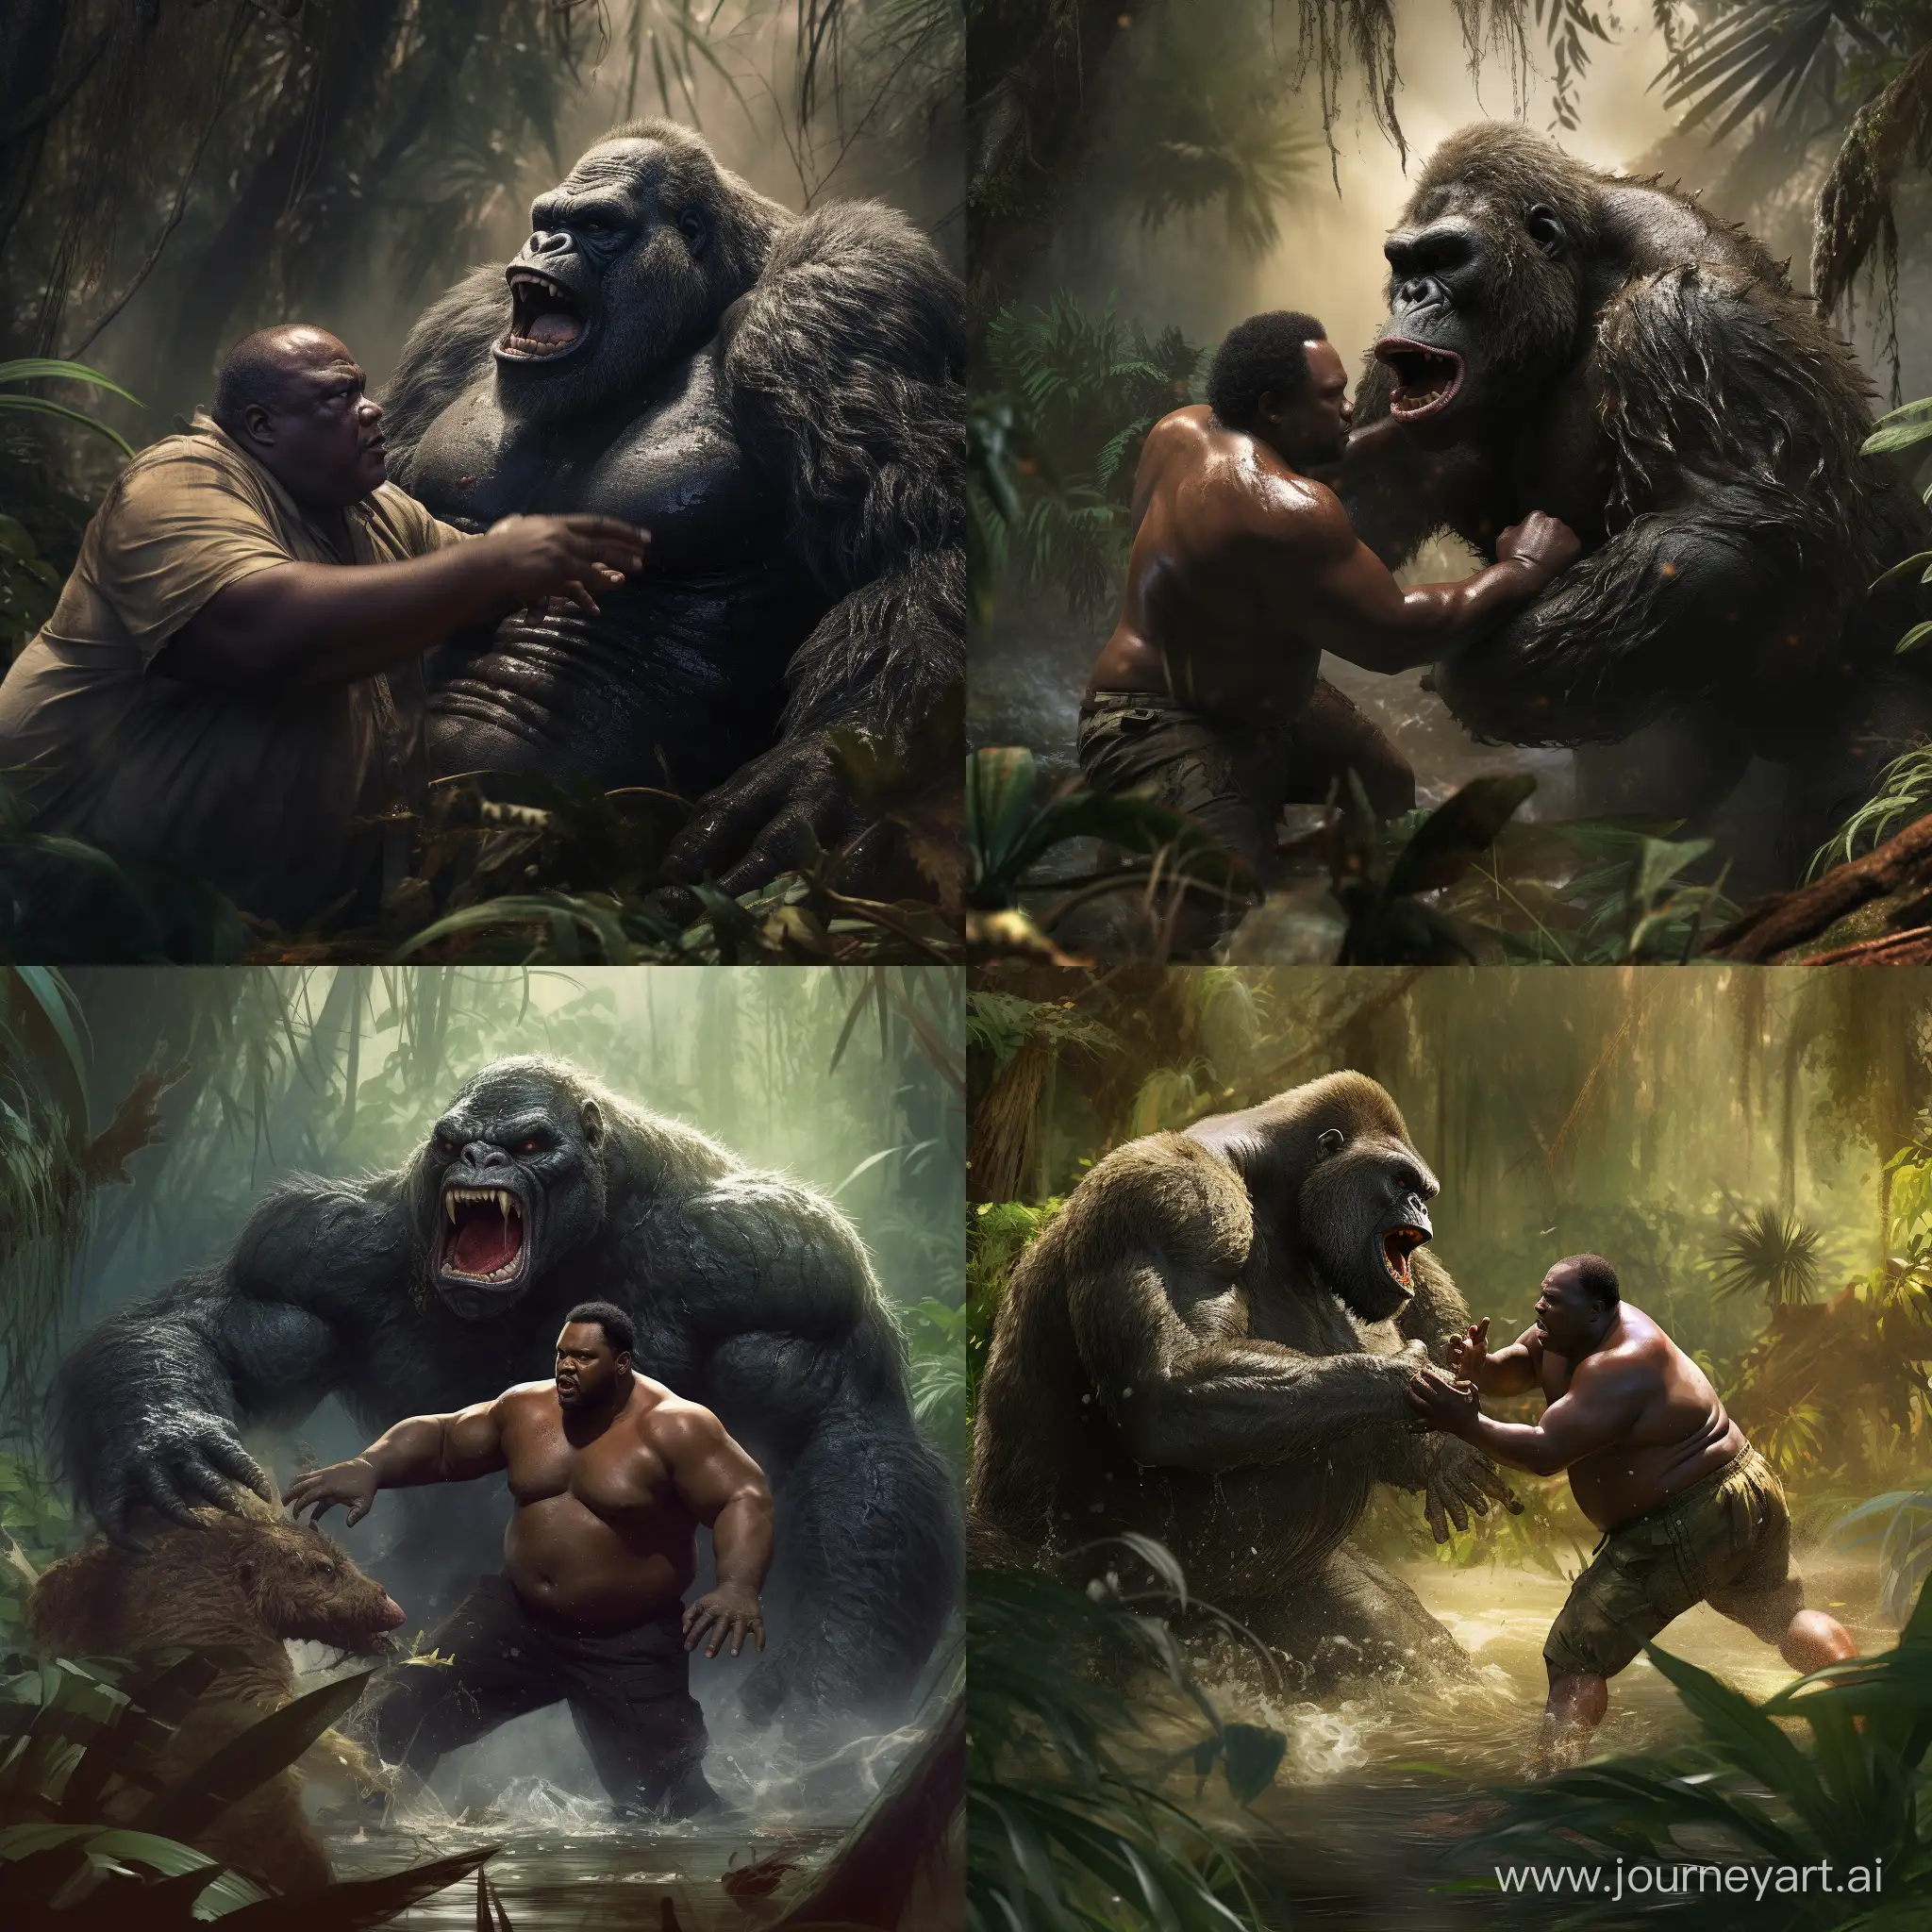 A fat African American man is fighting a gorilla in a littered swamp